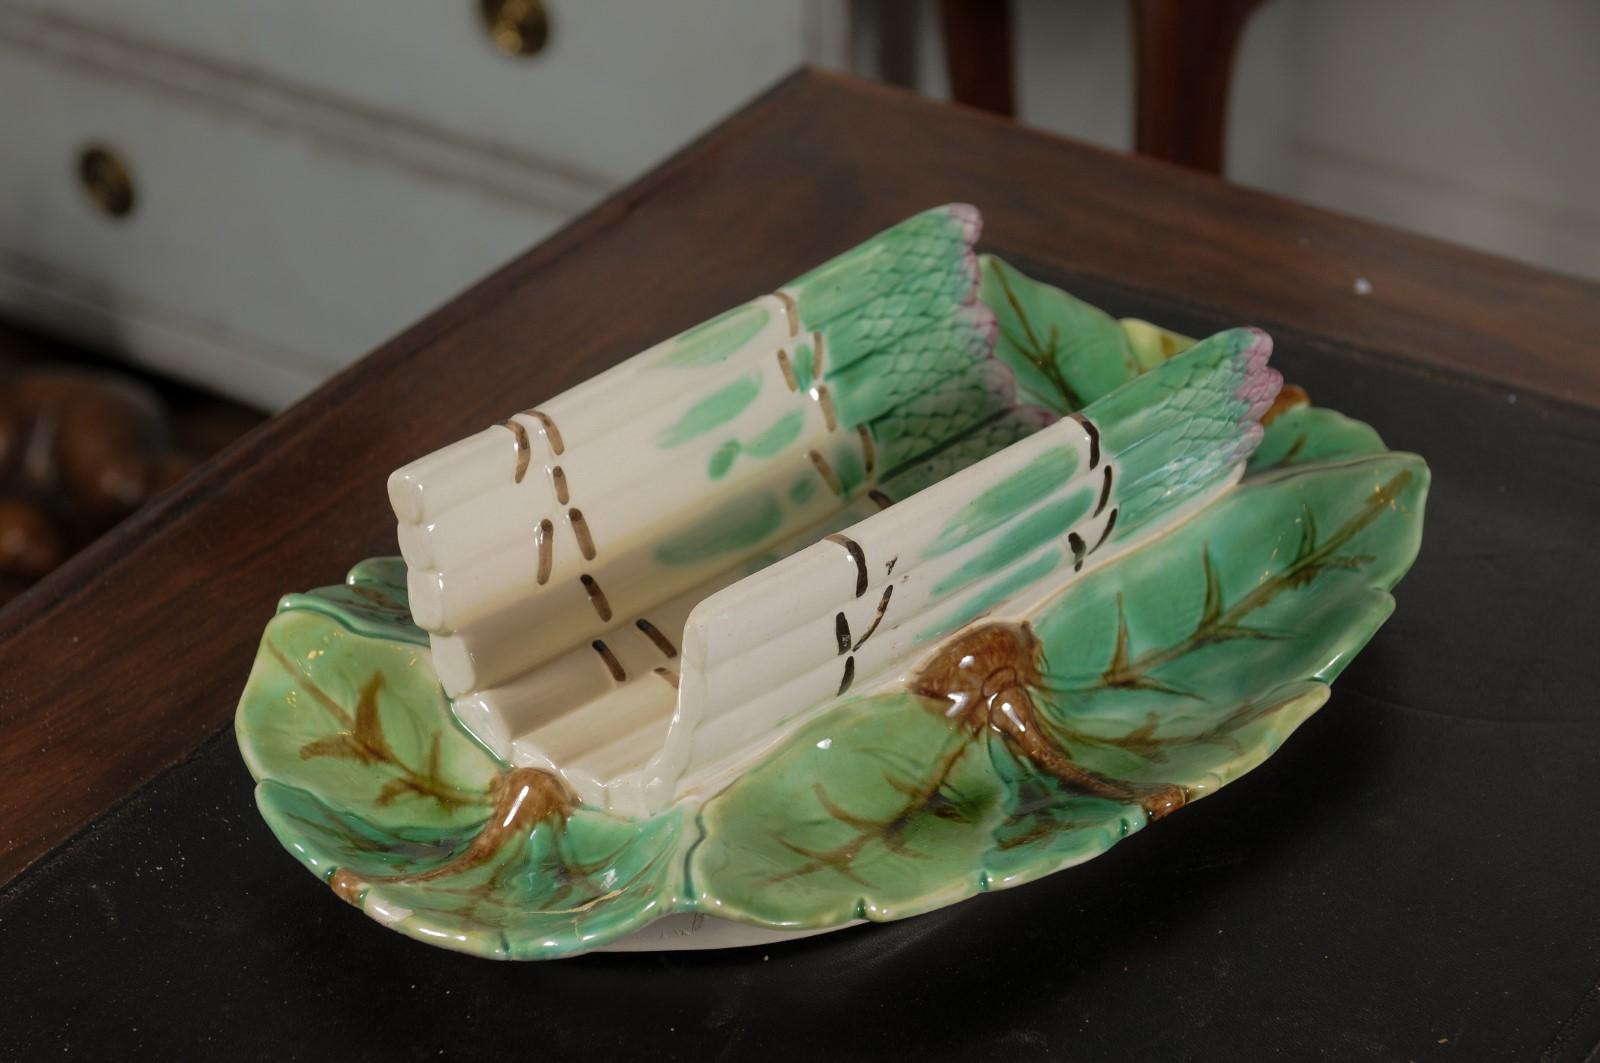 French 19th Century Longchamp Majolica Asparagus Tray with Foliage Platter For Sale 4